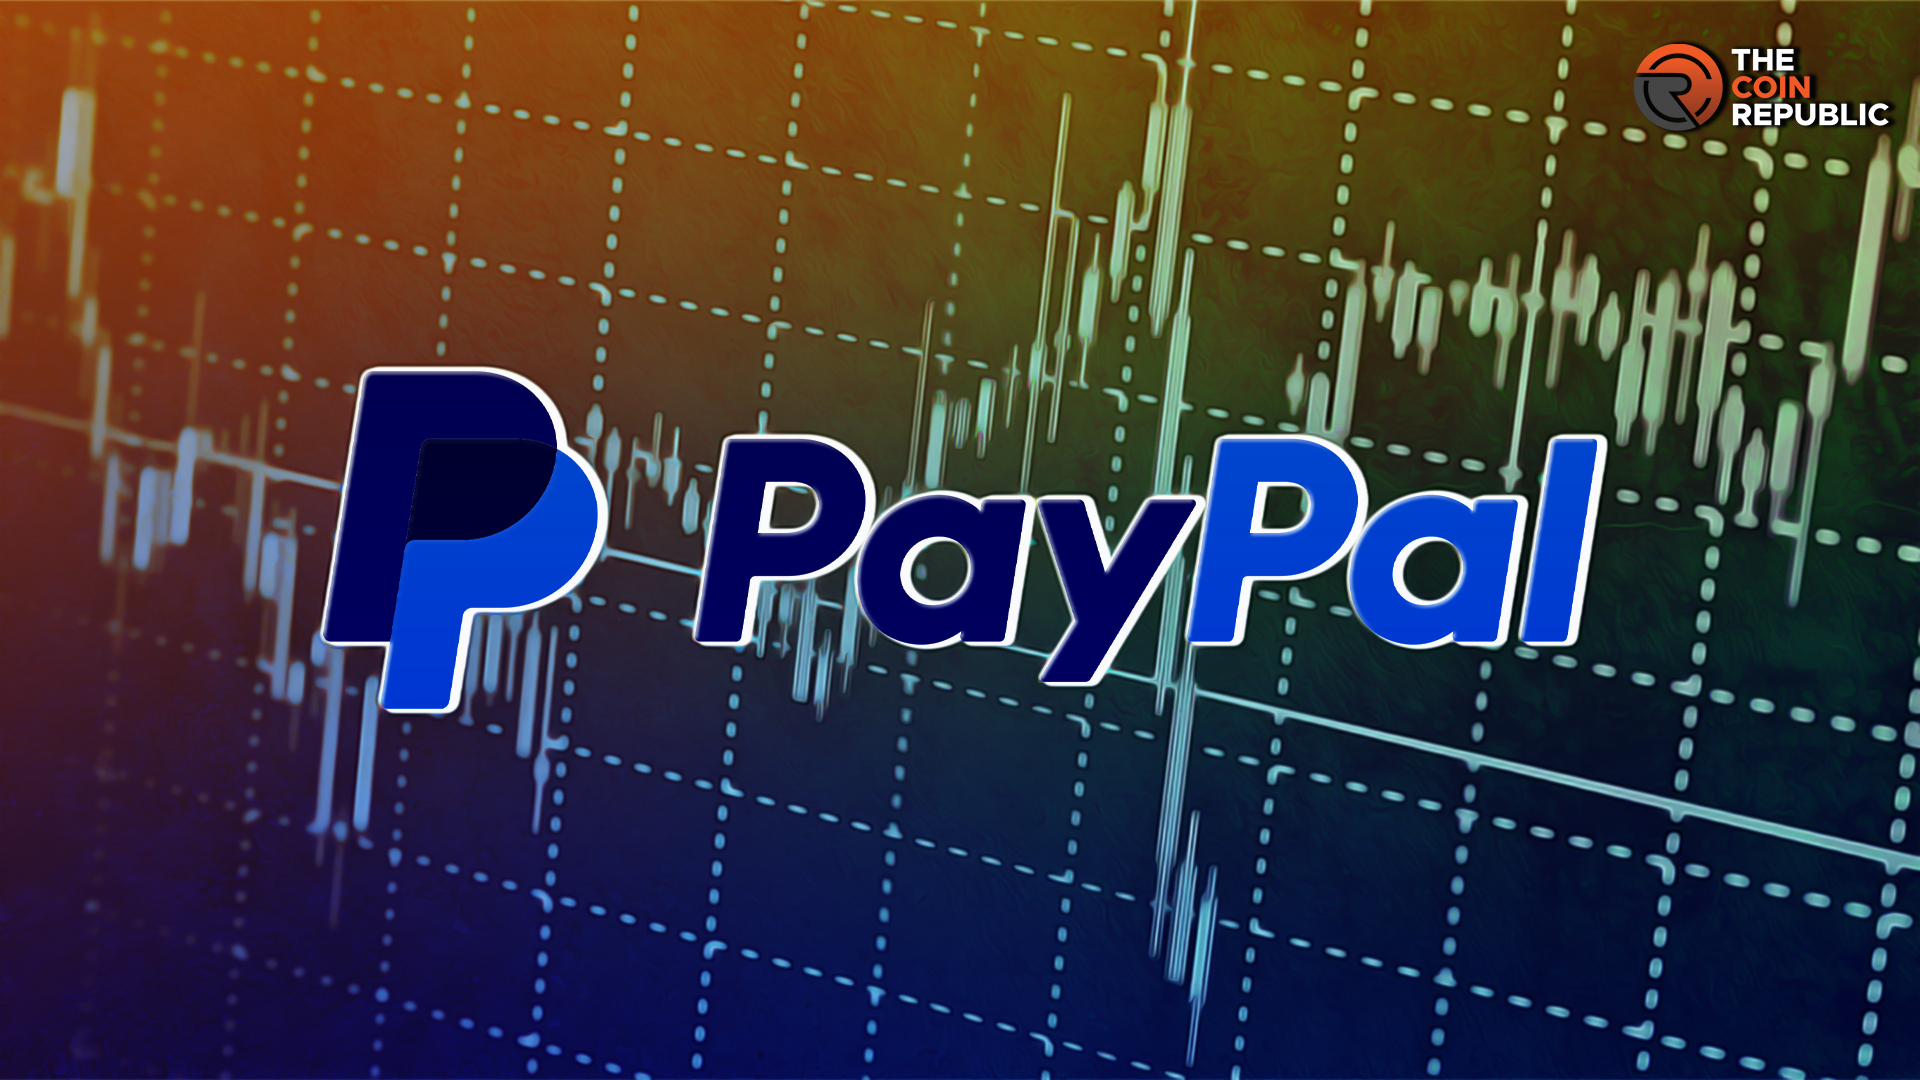 Paypal (PYPL) Stock: PYPL Stock Has Never Been This Cheaper